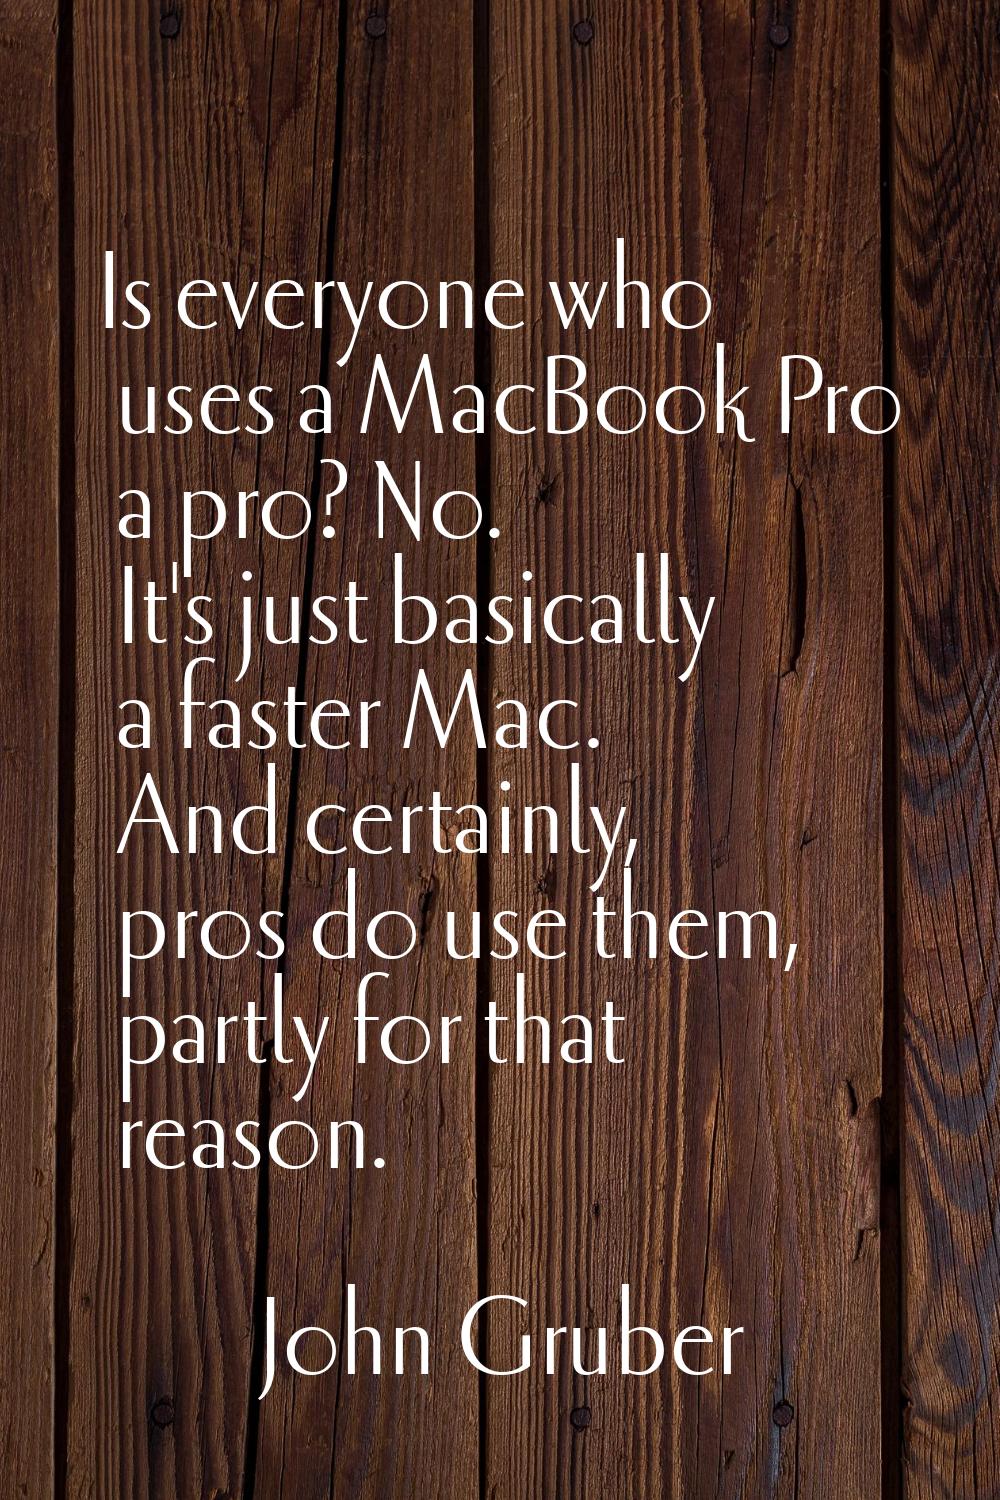 Is everyone who uses a MacBook Pro a pro? No. It's just basically a faster Mac. And certainly, pros